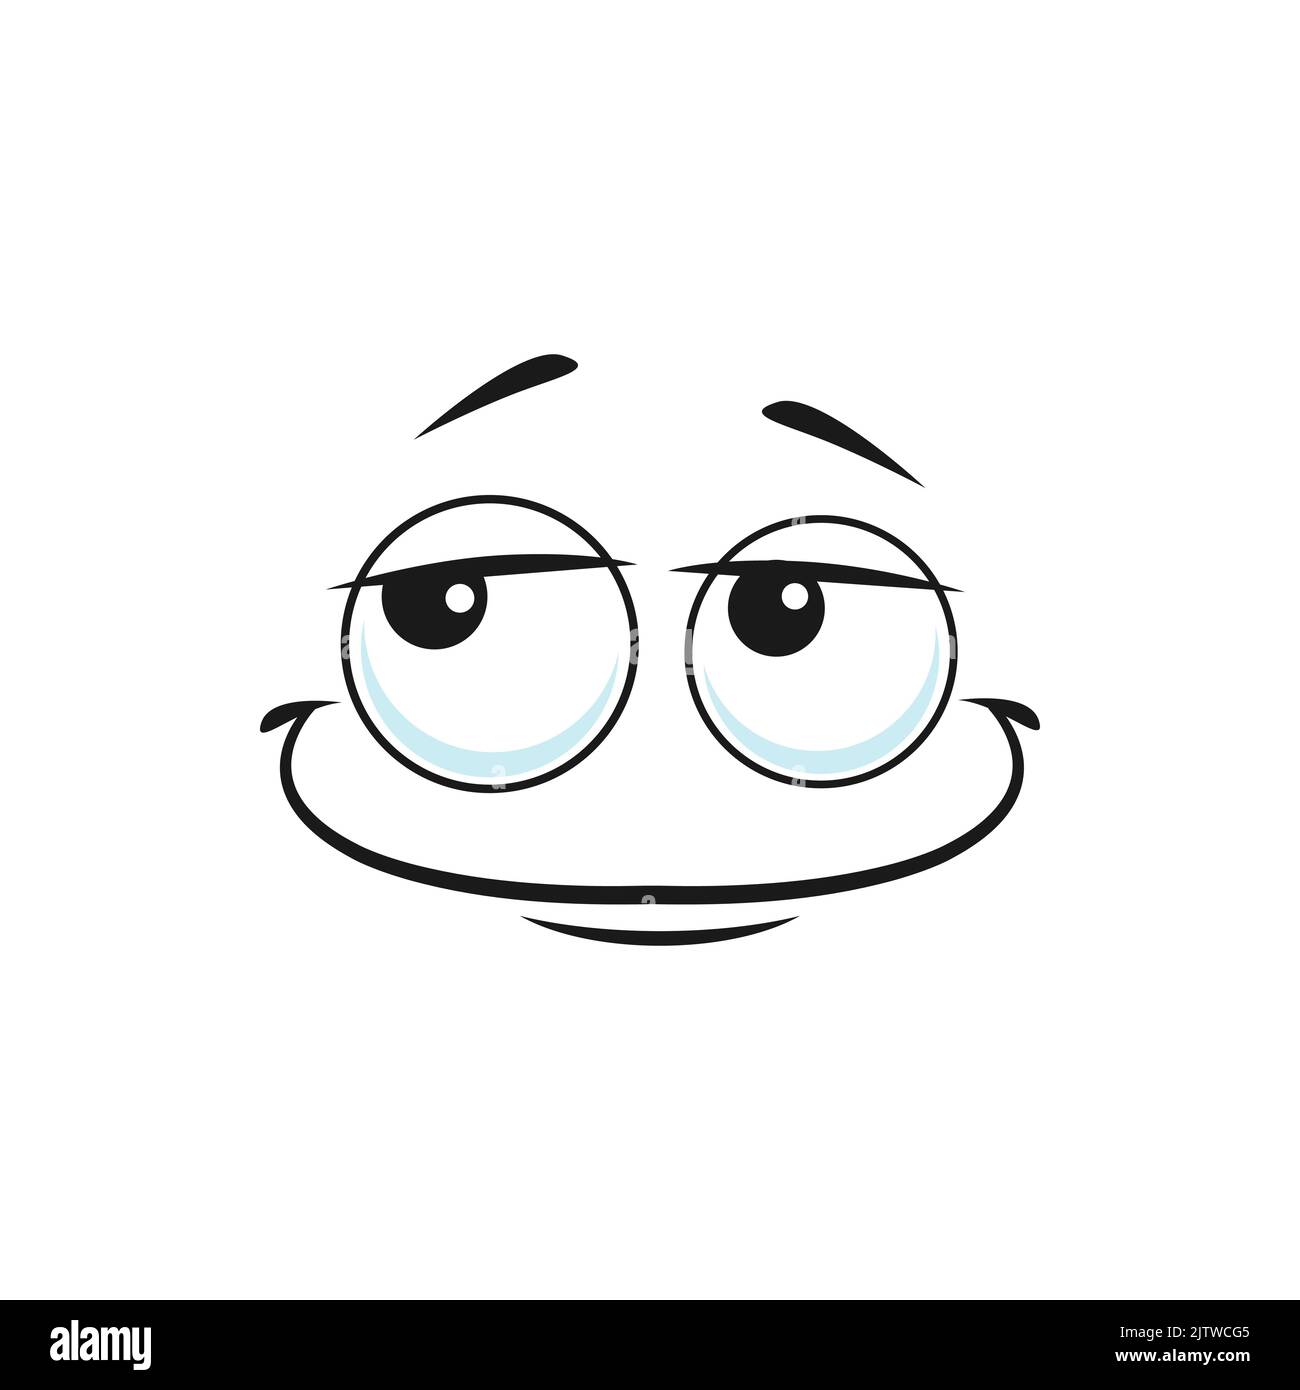 Cartoon Smiling Face Vector Dreamy Emoji With Thoughtful Smile And